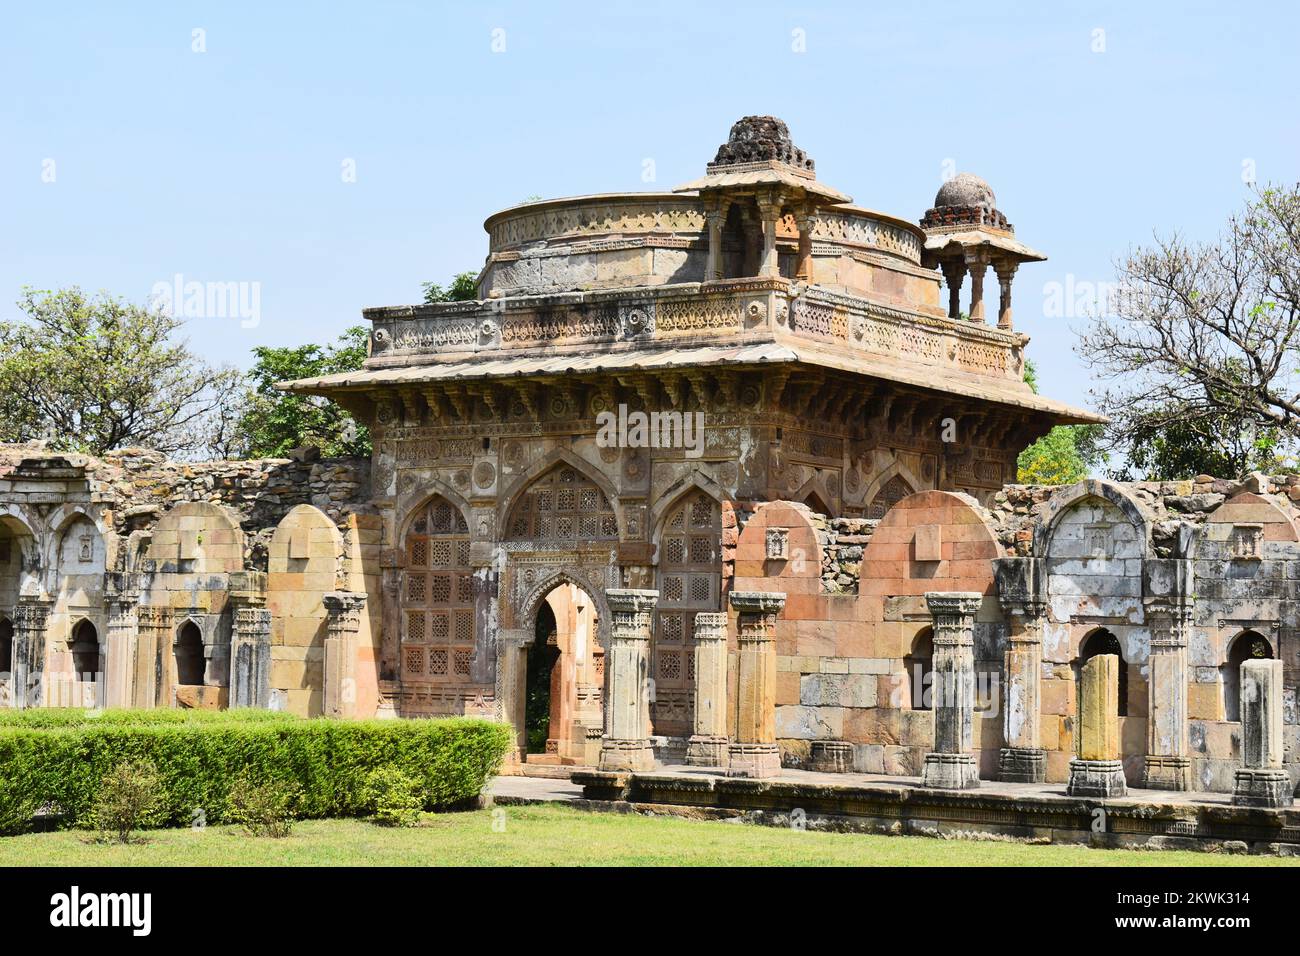 Jami Masjid, architectural archway and courtyard with intricate carvings in stone, an Islamic monuments was built by Sultan Mahmud Begada in 1509, Cha Stock Photo